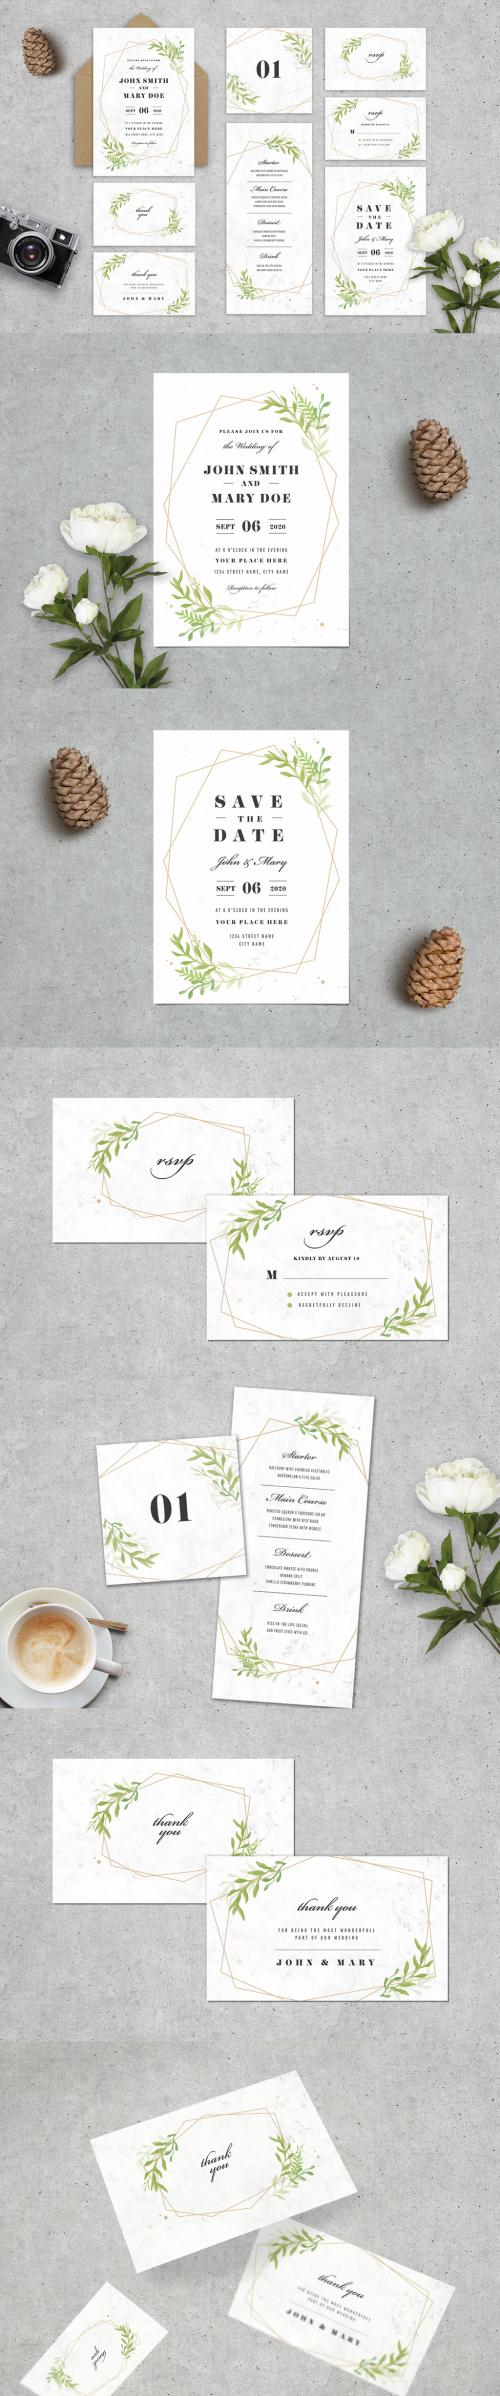 Wedding Stationery Layout with Leaves and Geometric Shapes - 216032409